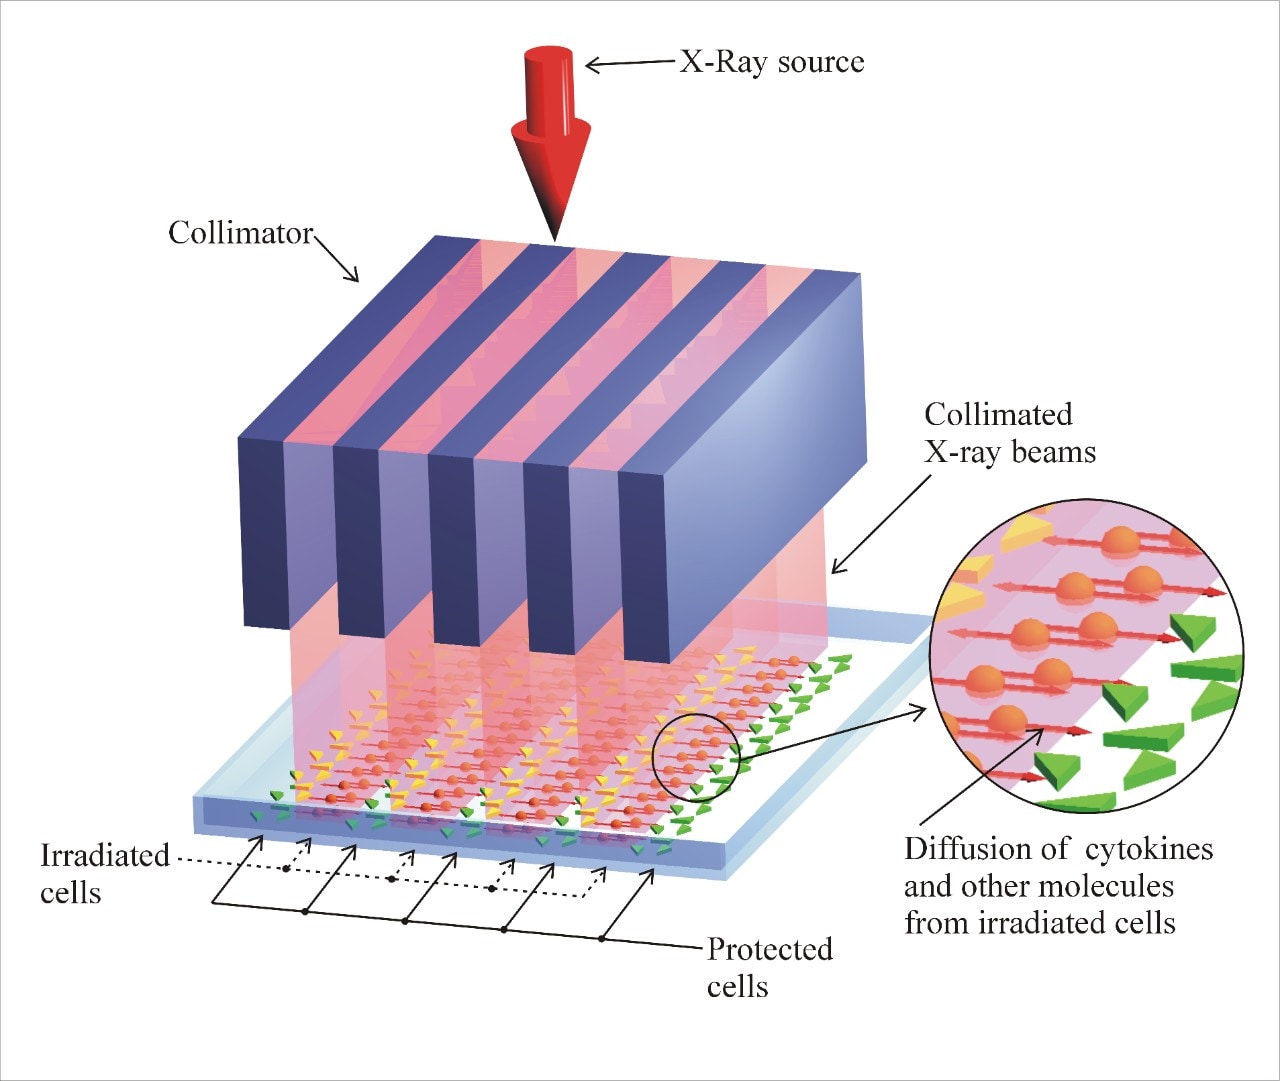 Diagram showing how targeted stripes of radiation can interact with cells, using the bystander effect.